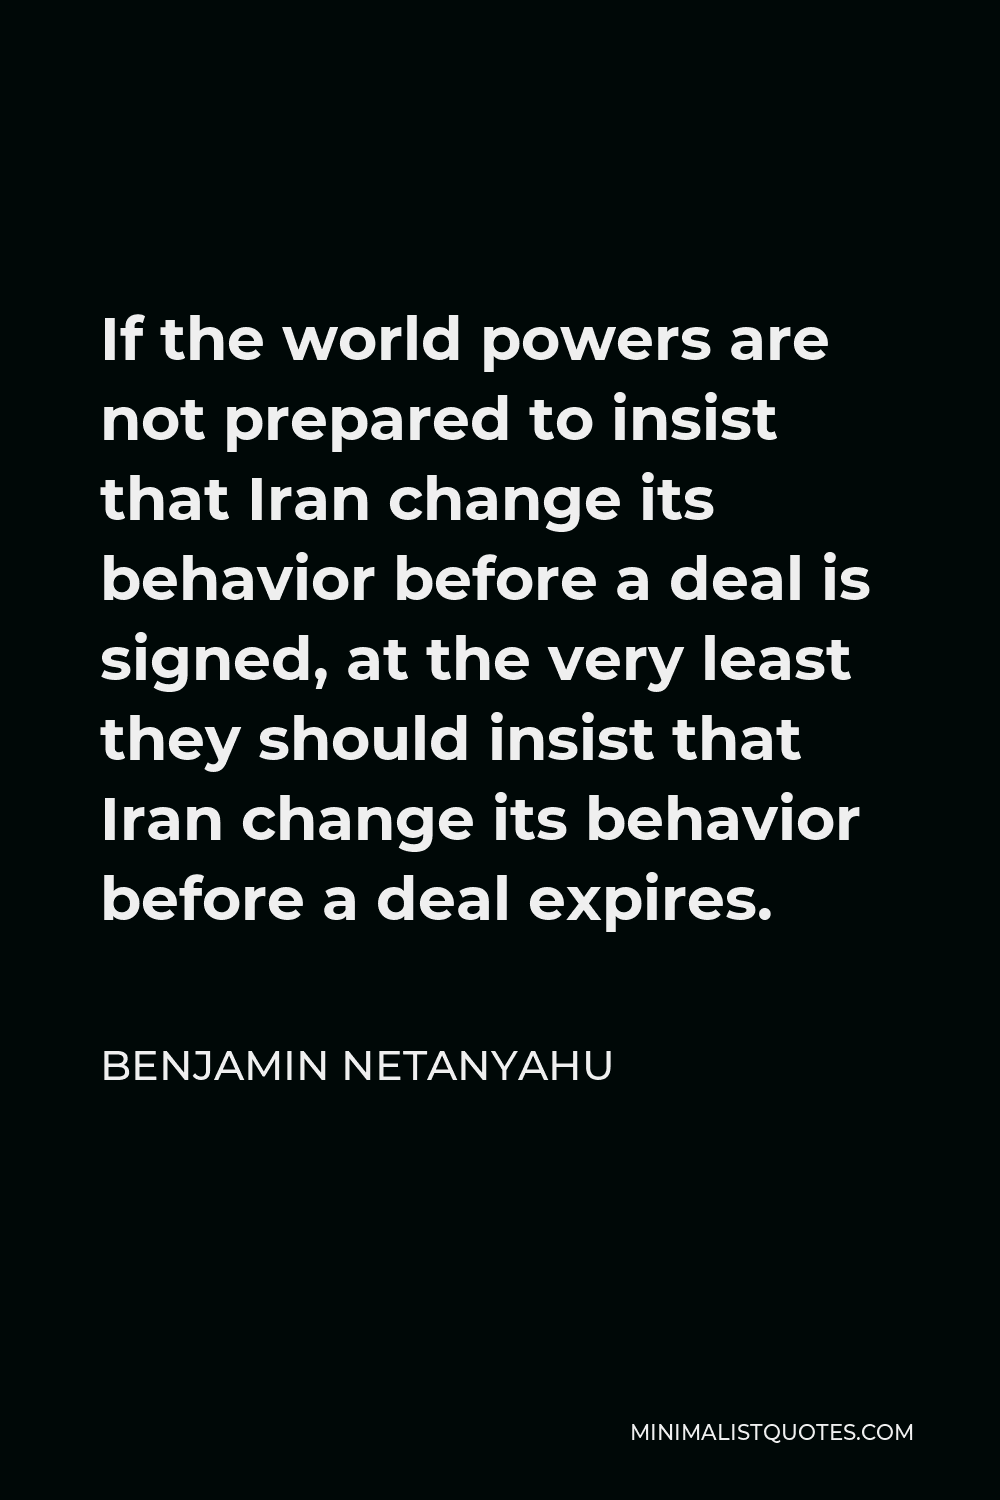 Benjamin Netanyahu Quote - If the world powers are not prepared to insist that Iran change its behavior before a deal is signed, at the very least they should insist that Iran change its behavior before a deal expires.